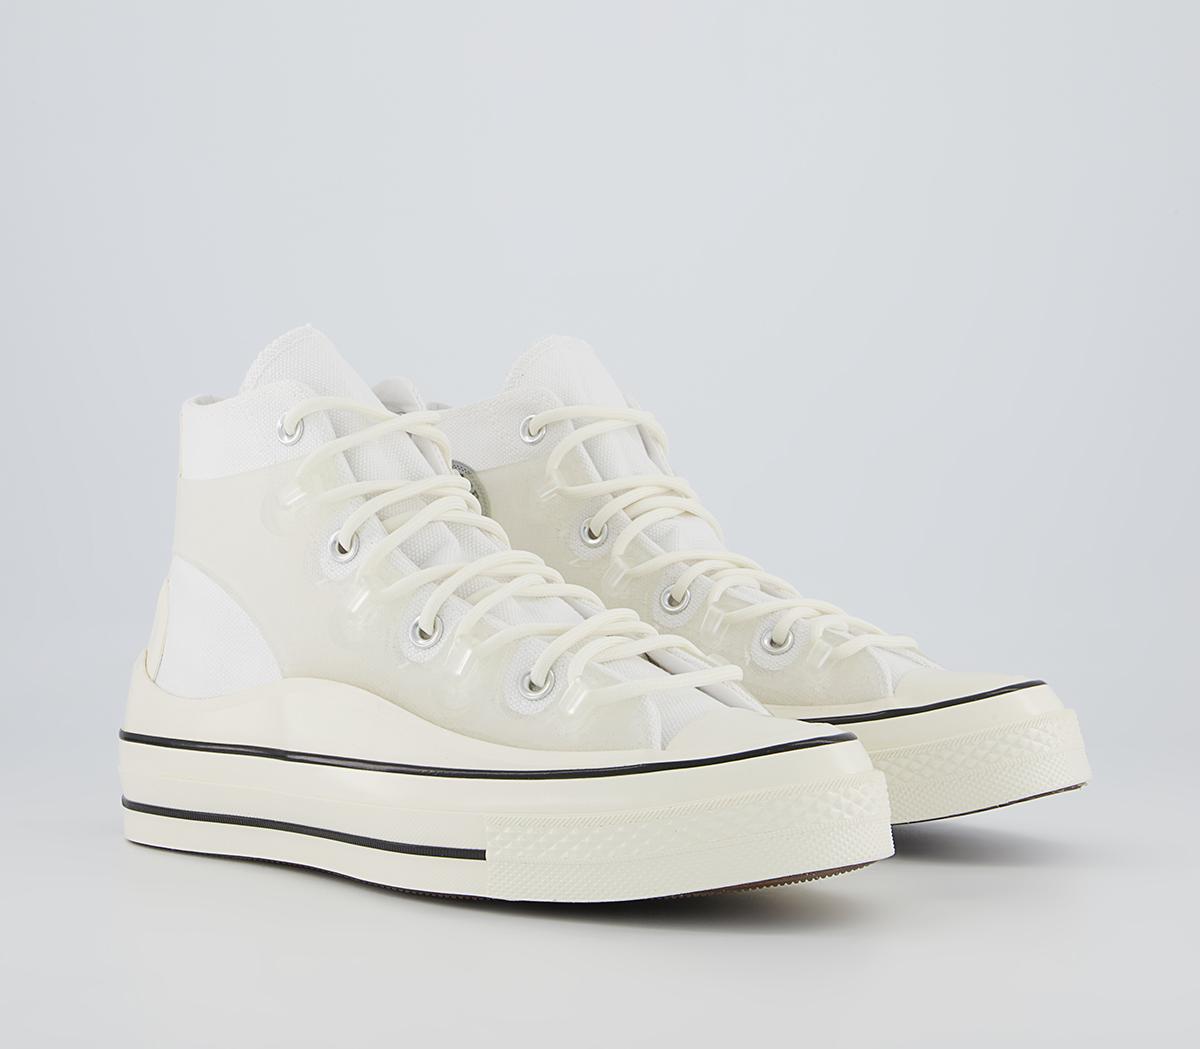 Converse All Star Hi 70s Trainers Utility White Translucent Caged ...